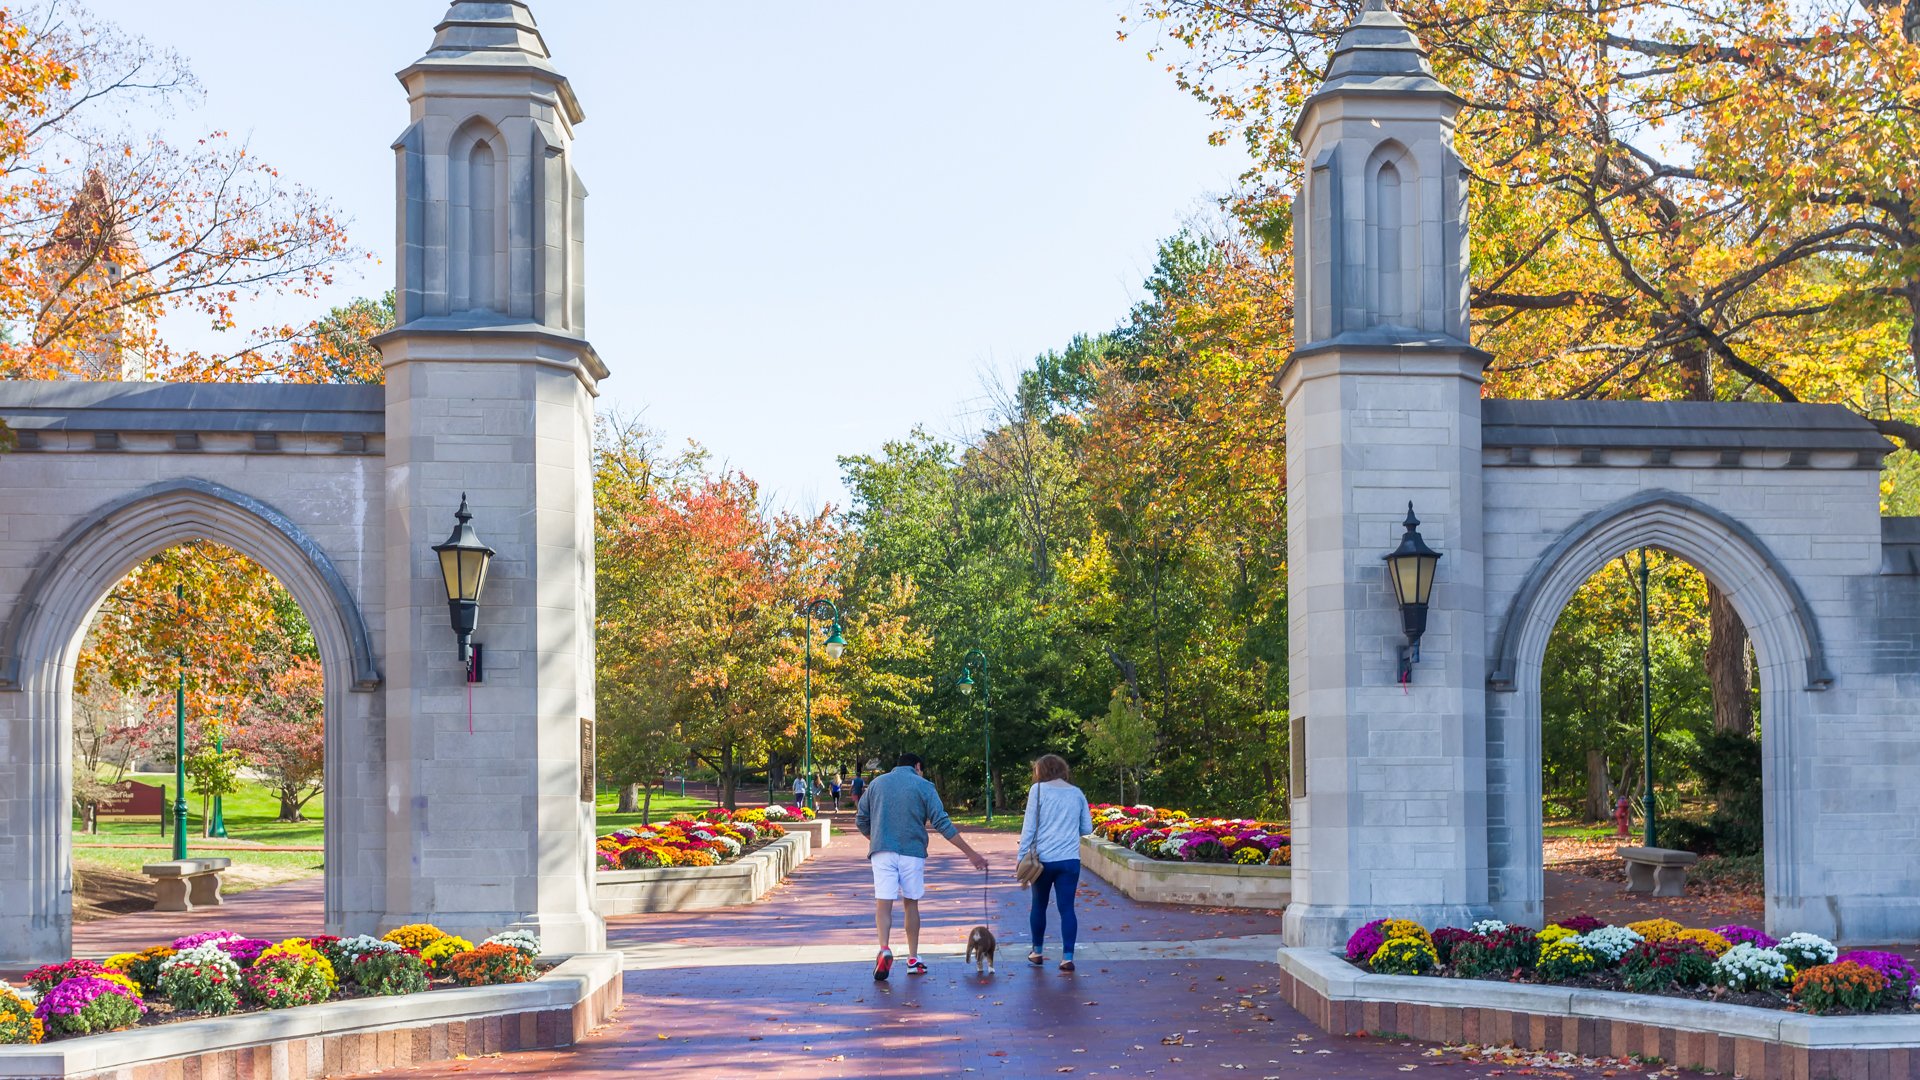 <ul> <li><strong>Location: </strong>Bloomington, Indiana</li> <li><strong>Tuition and fees for 2022-23: </strong>$11,446</li> <li><strong>4-year graduation rate: </strong>69%</li> <li><strong>6-year graduation rate: </strong>81%</li> </ul> <p class="has-small-font-size"><em>Methodology: GOBankingRates examined the U.S. News & World Report's 2022 Best National University Rankings list and identified the 25 highest-ranking schools with tuition and fees for the 2022-23 school year below $20,000. Information on each school's location and enrollment were provided from U.S. News & World Report. Tuition and fees were sourced from each university's website and include mandatory all-student fees, but exclude fees such as housing, dining, transportation and other variable costs associated with attendance. Tuition rates for full-time freshmen were selected where variable estimates were provided. Supplemental data on each school's four- and six-year graduation rates for students pursuing bachelor's degrees who began in 2015 was sourced from the National Center for Education Statistic's College Navigator.  All data was compiled on and up to date as of Aug. 3, 2022.</em></p>  <p><strong><em>More From GOBankingRates</em></strong></p>   <ul> <li><strong><em><a href="https://www.gobankingrates.com/net-worth/business-people/richest-people-in-the-world/?utm_campaign=1178620&utm_source=msn.com&utm_content=6&utm_medium=rss">Top 10 Richest People in the World</a></em></strong></li> <li><strong><em><a href="https://www.gobankingrates.com/saving-money/shopping/surprising-things-you-can-buy-with-food-stamps/?utm_campaign=1178620&utm_source=msn.com&utm_content=7&utm_medium=rss">Surprising Things You Can Buy With Food Stamps</a></em></strong></li> <li><strong><em><a href="https://www.gobankingrates.com/top-alternative-investments-1270486/?utm_campaign=1178620&utm_source=msn.com&utm_content=8&utm_medium=rss">Looking To Diversify in a Bear Market? Consider These Alternative Investments</a></em></strong></li> <li><a href="https://www.gobankingrates.com/saving-money/savings-advice/ways-youre-throwing-money-away/?utm_campaign=1178620&utm_source=msn.com&utm_content=9&utm_medium=rss"><em><strong>20 Ways You're Throwing Money Away</strong></em></a></li> </ul>